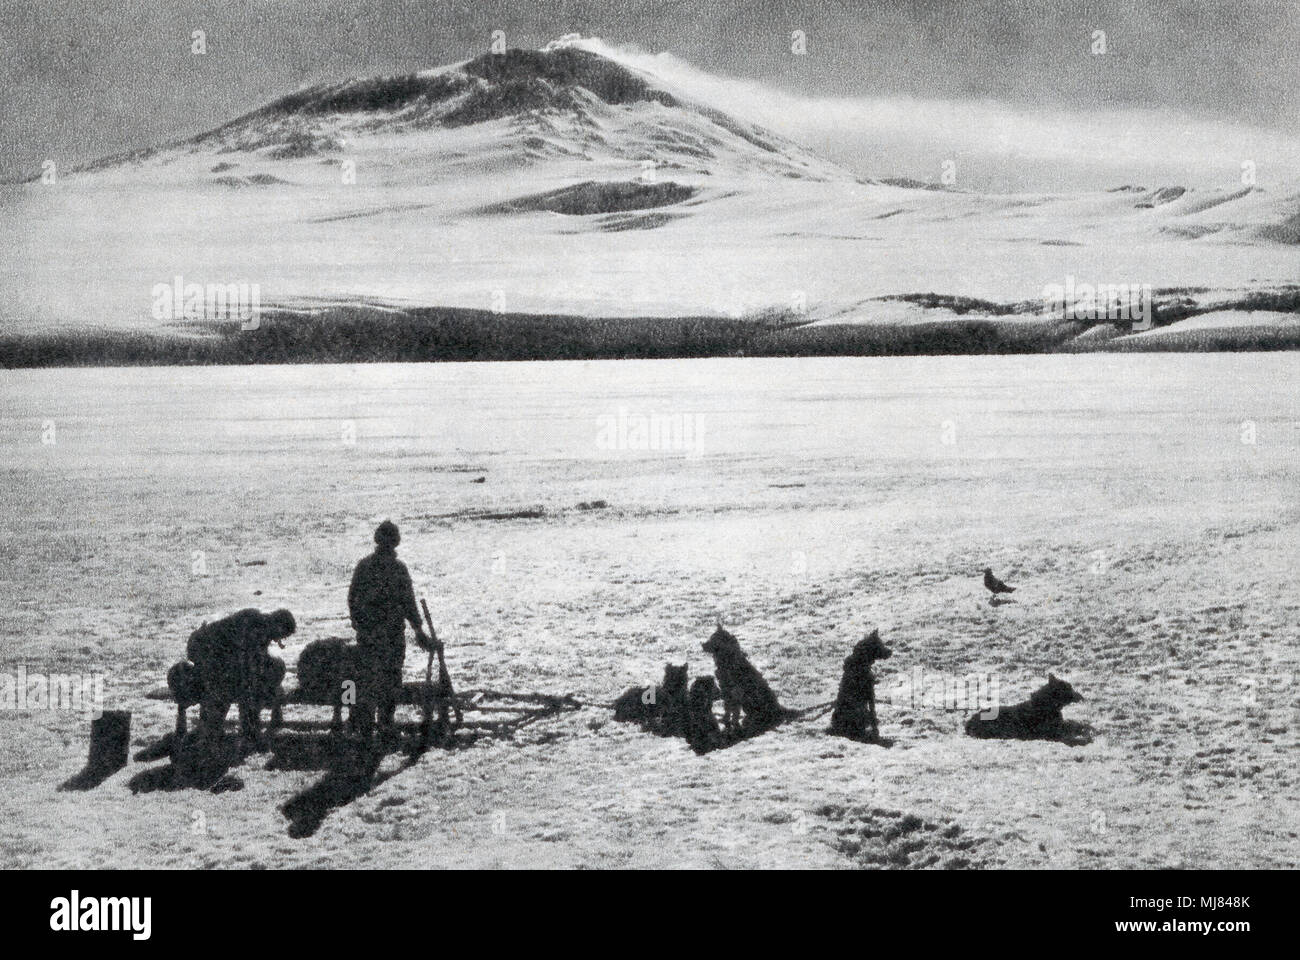 Dog sledge, showing Mount Erebus in the background.  After a photograph taken by Ponting during Robert Falcon Scott's Terra Nova Antarctic Expedition, 1910-1913.    From British Polar Explorers, published 1943. Stock Photo